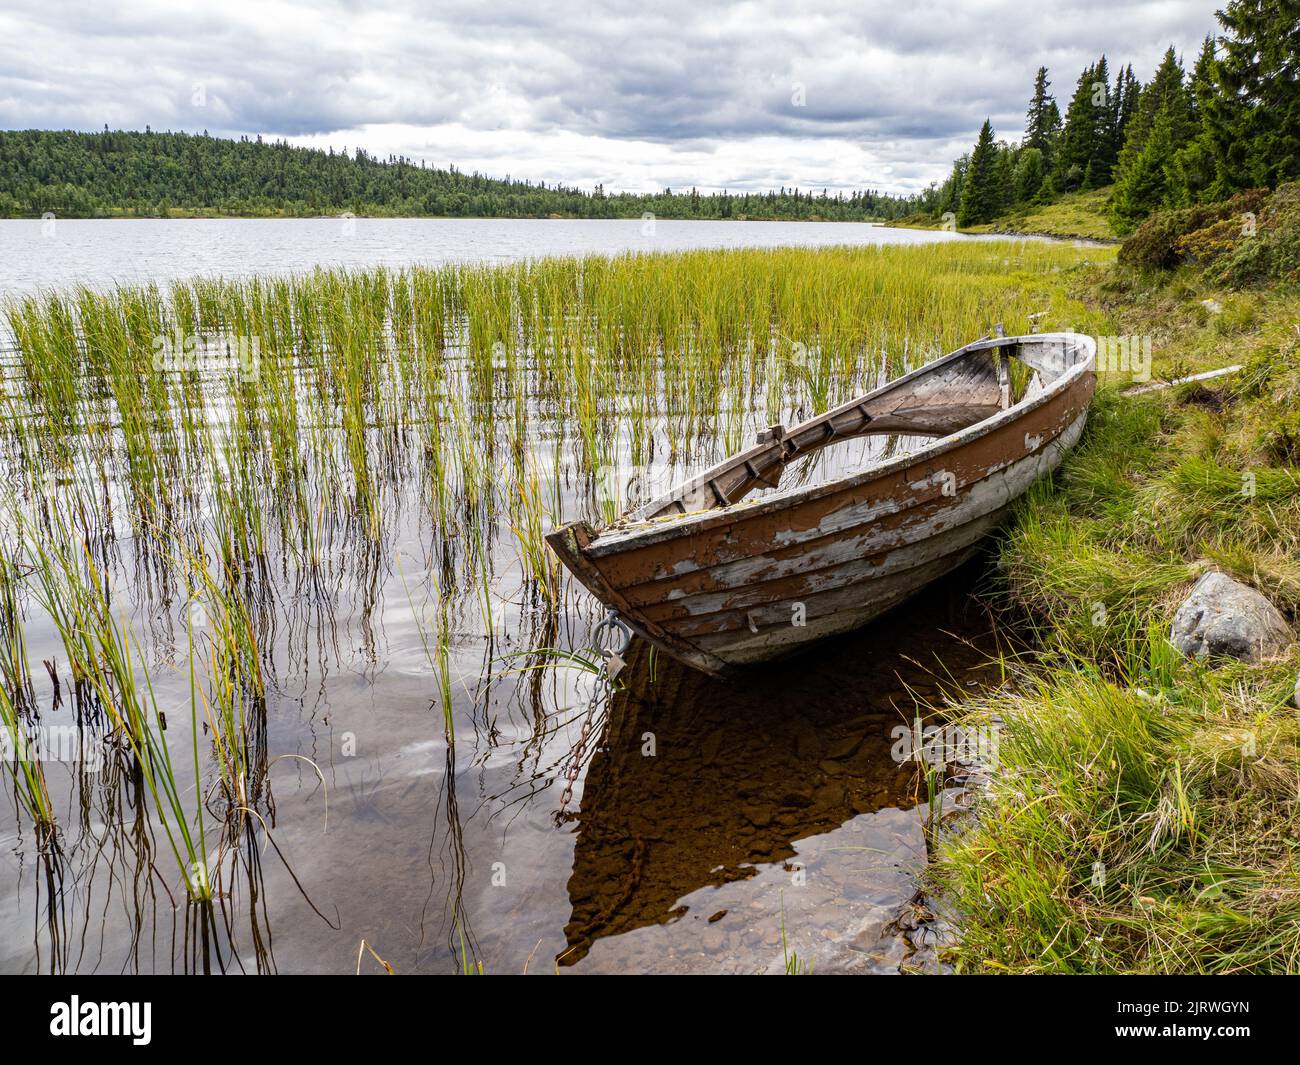 Scuppered wooden rowing boat by a mountain lake in central Norway Stock Photo